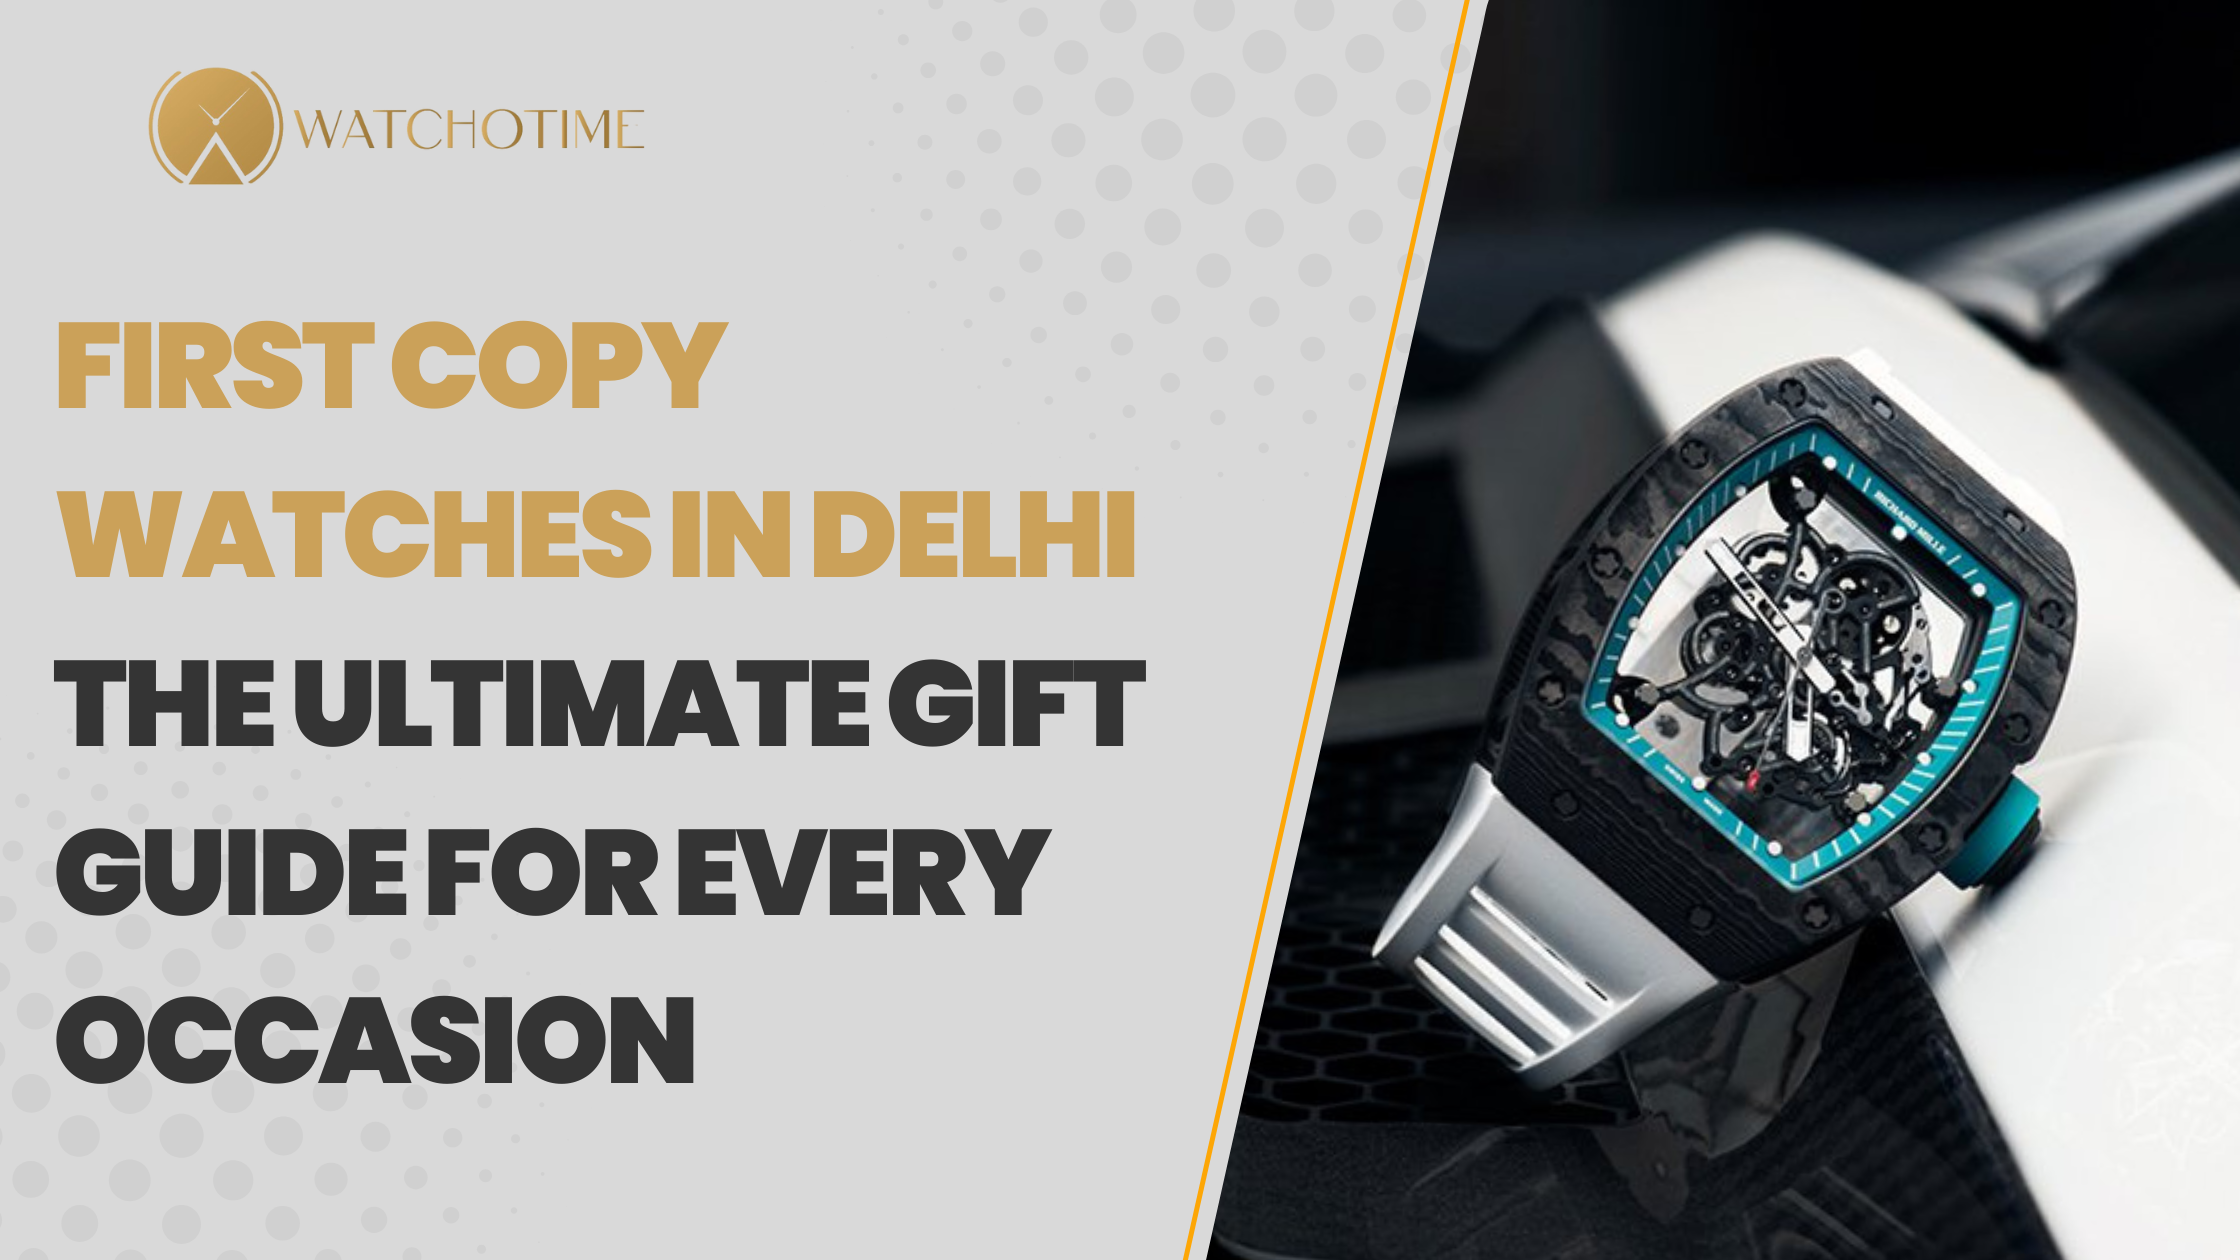 First Copy Watches in Delhi The Ultimate Gift Guide for Every Occasion